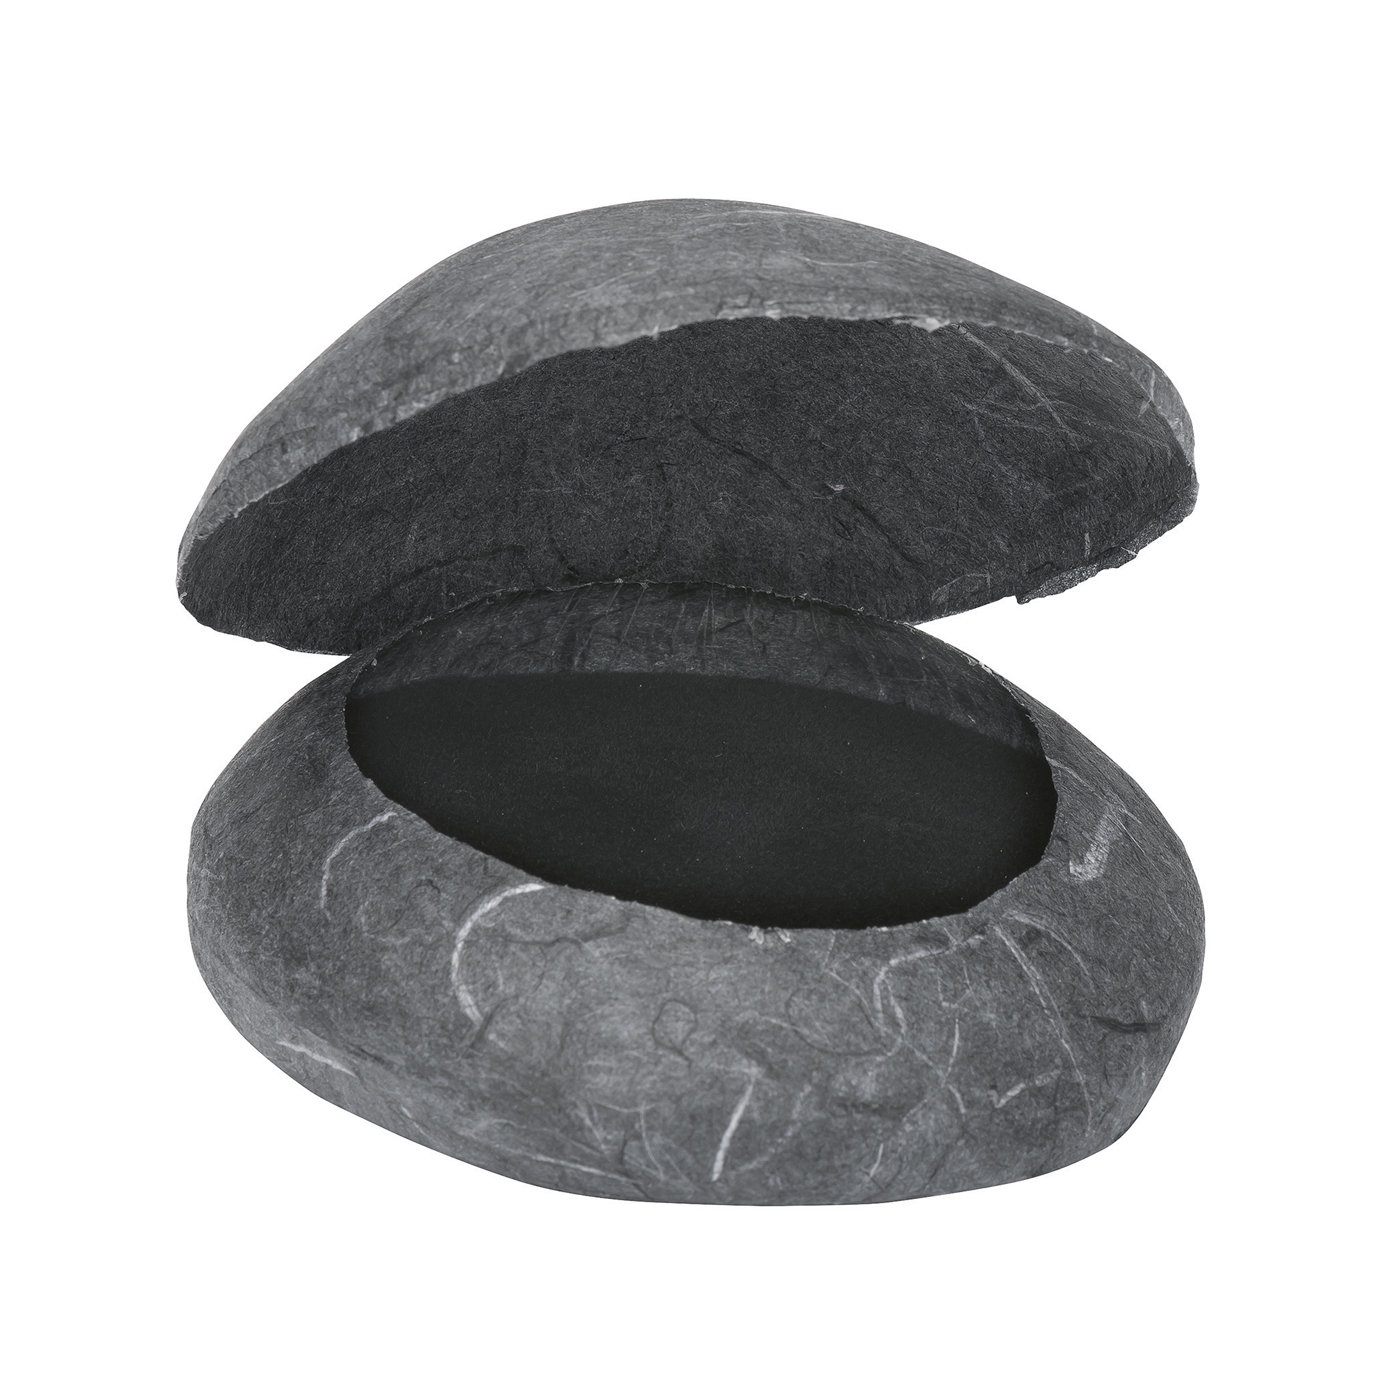 Jewellery Packaging "Stone", Anthracite Mottled,ø 90 x 50 mm - 1 piece